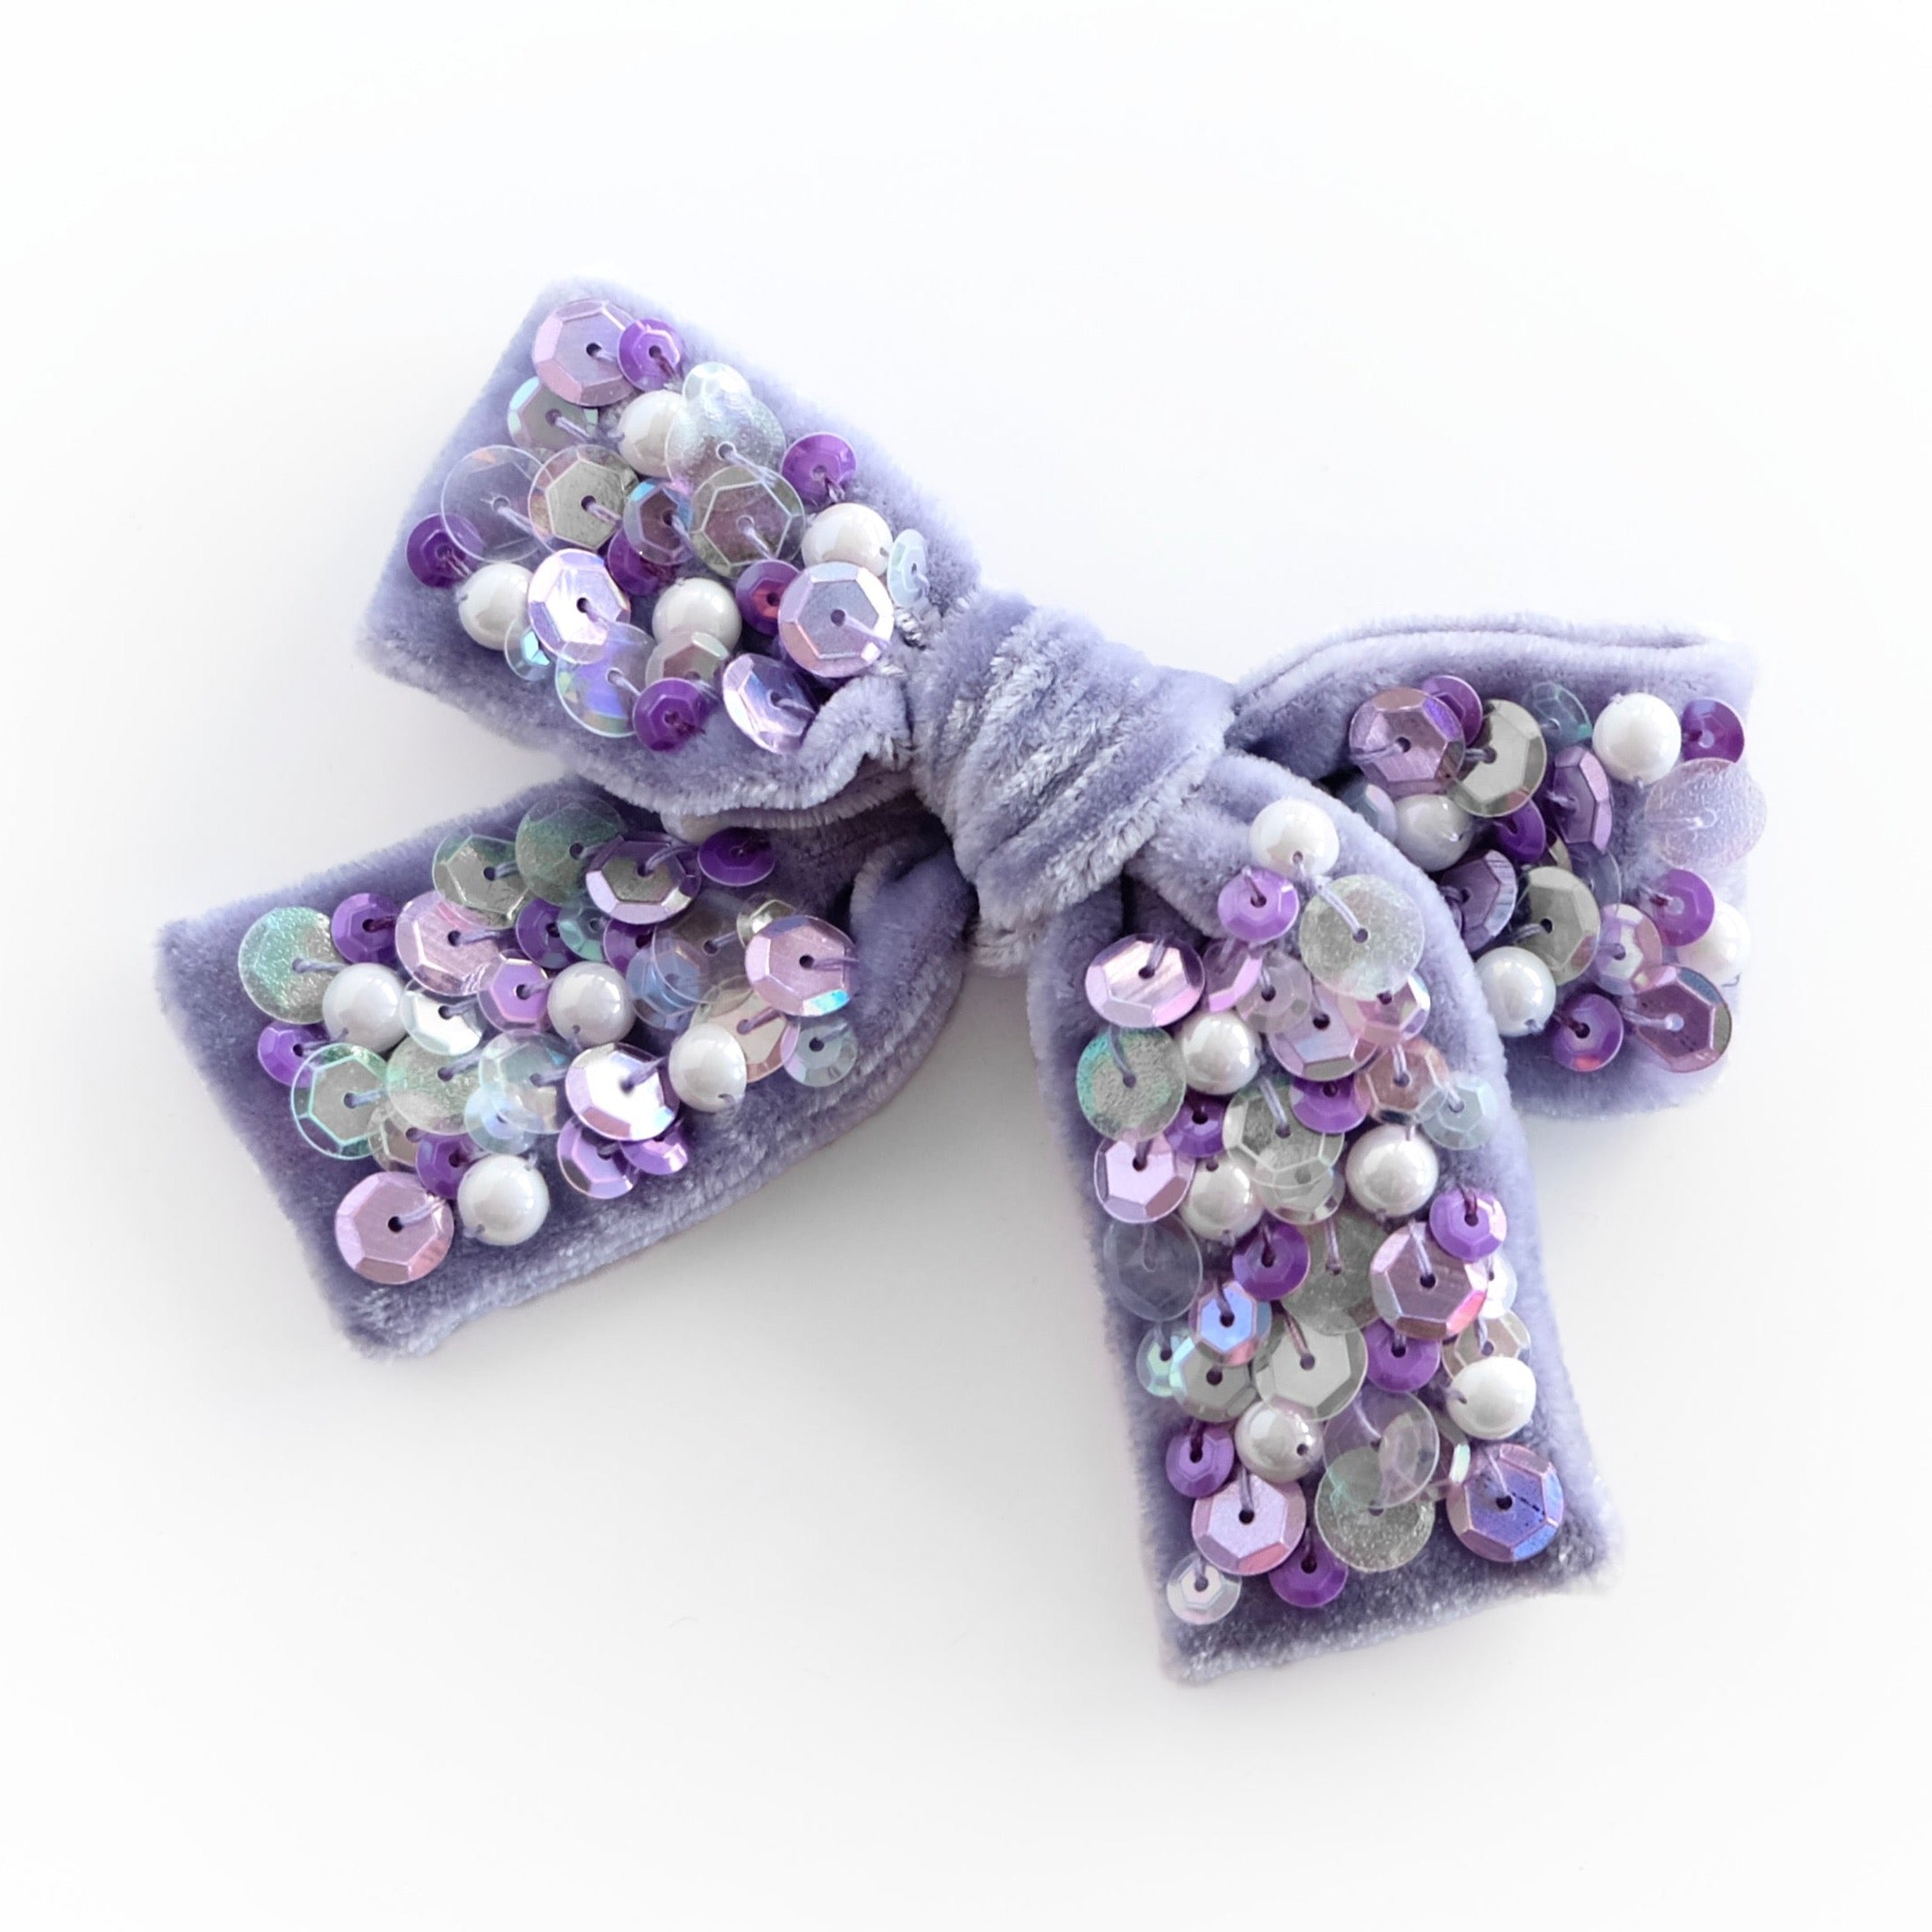 lavender color velvet hair bow with sequins and pearls.